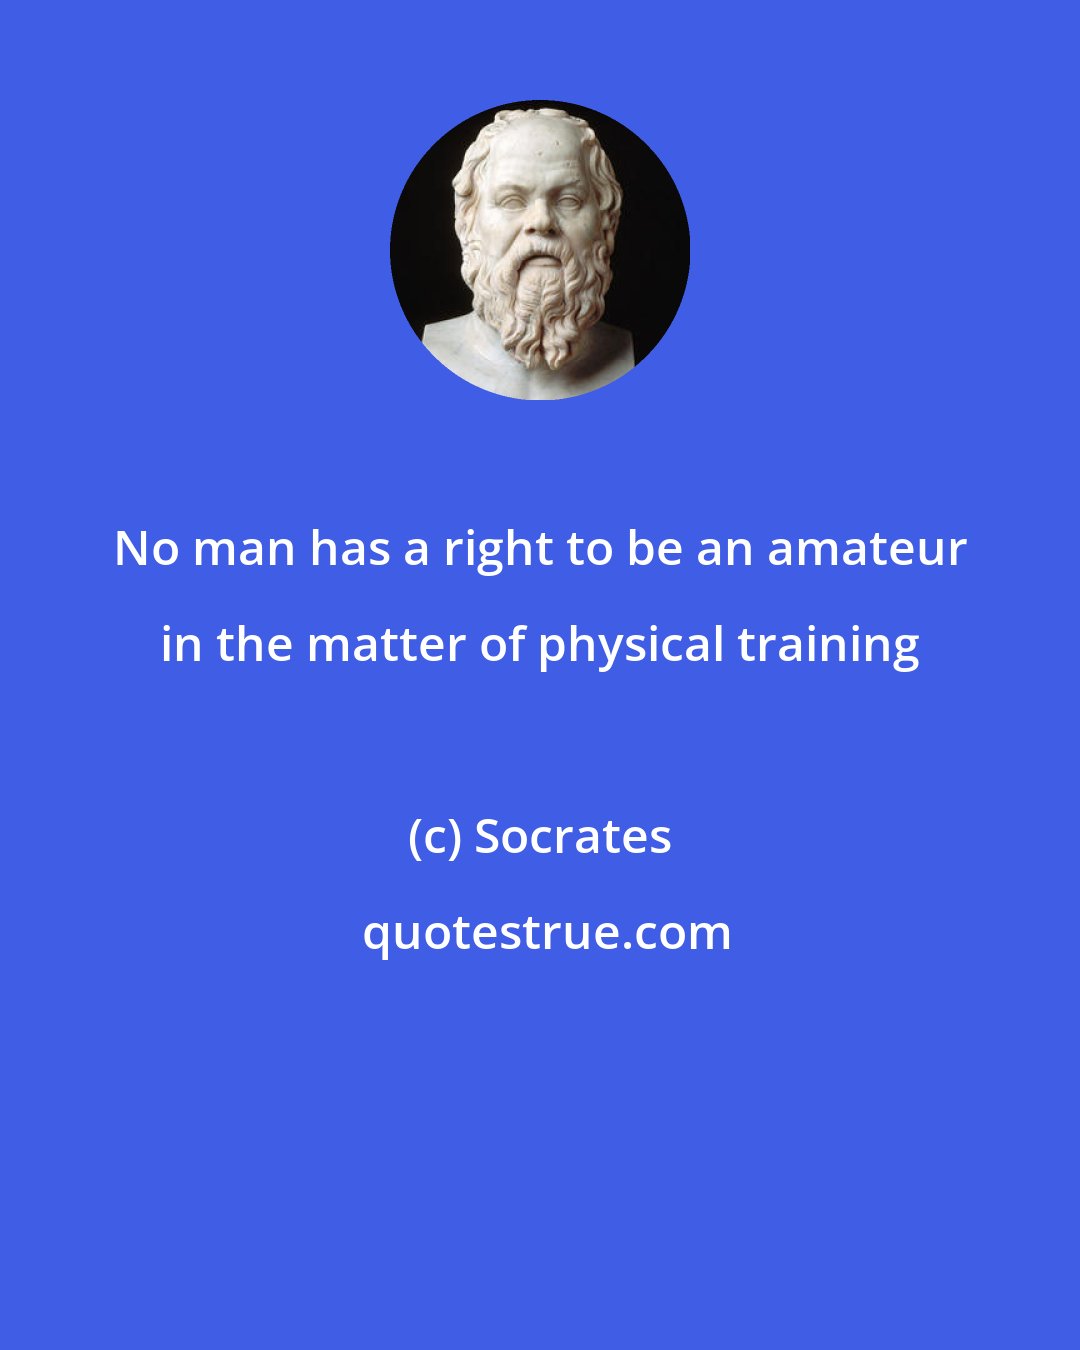 Socrates: No man has a right to be an amateur in the matter of physical training